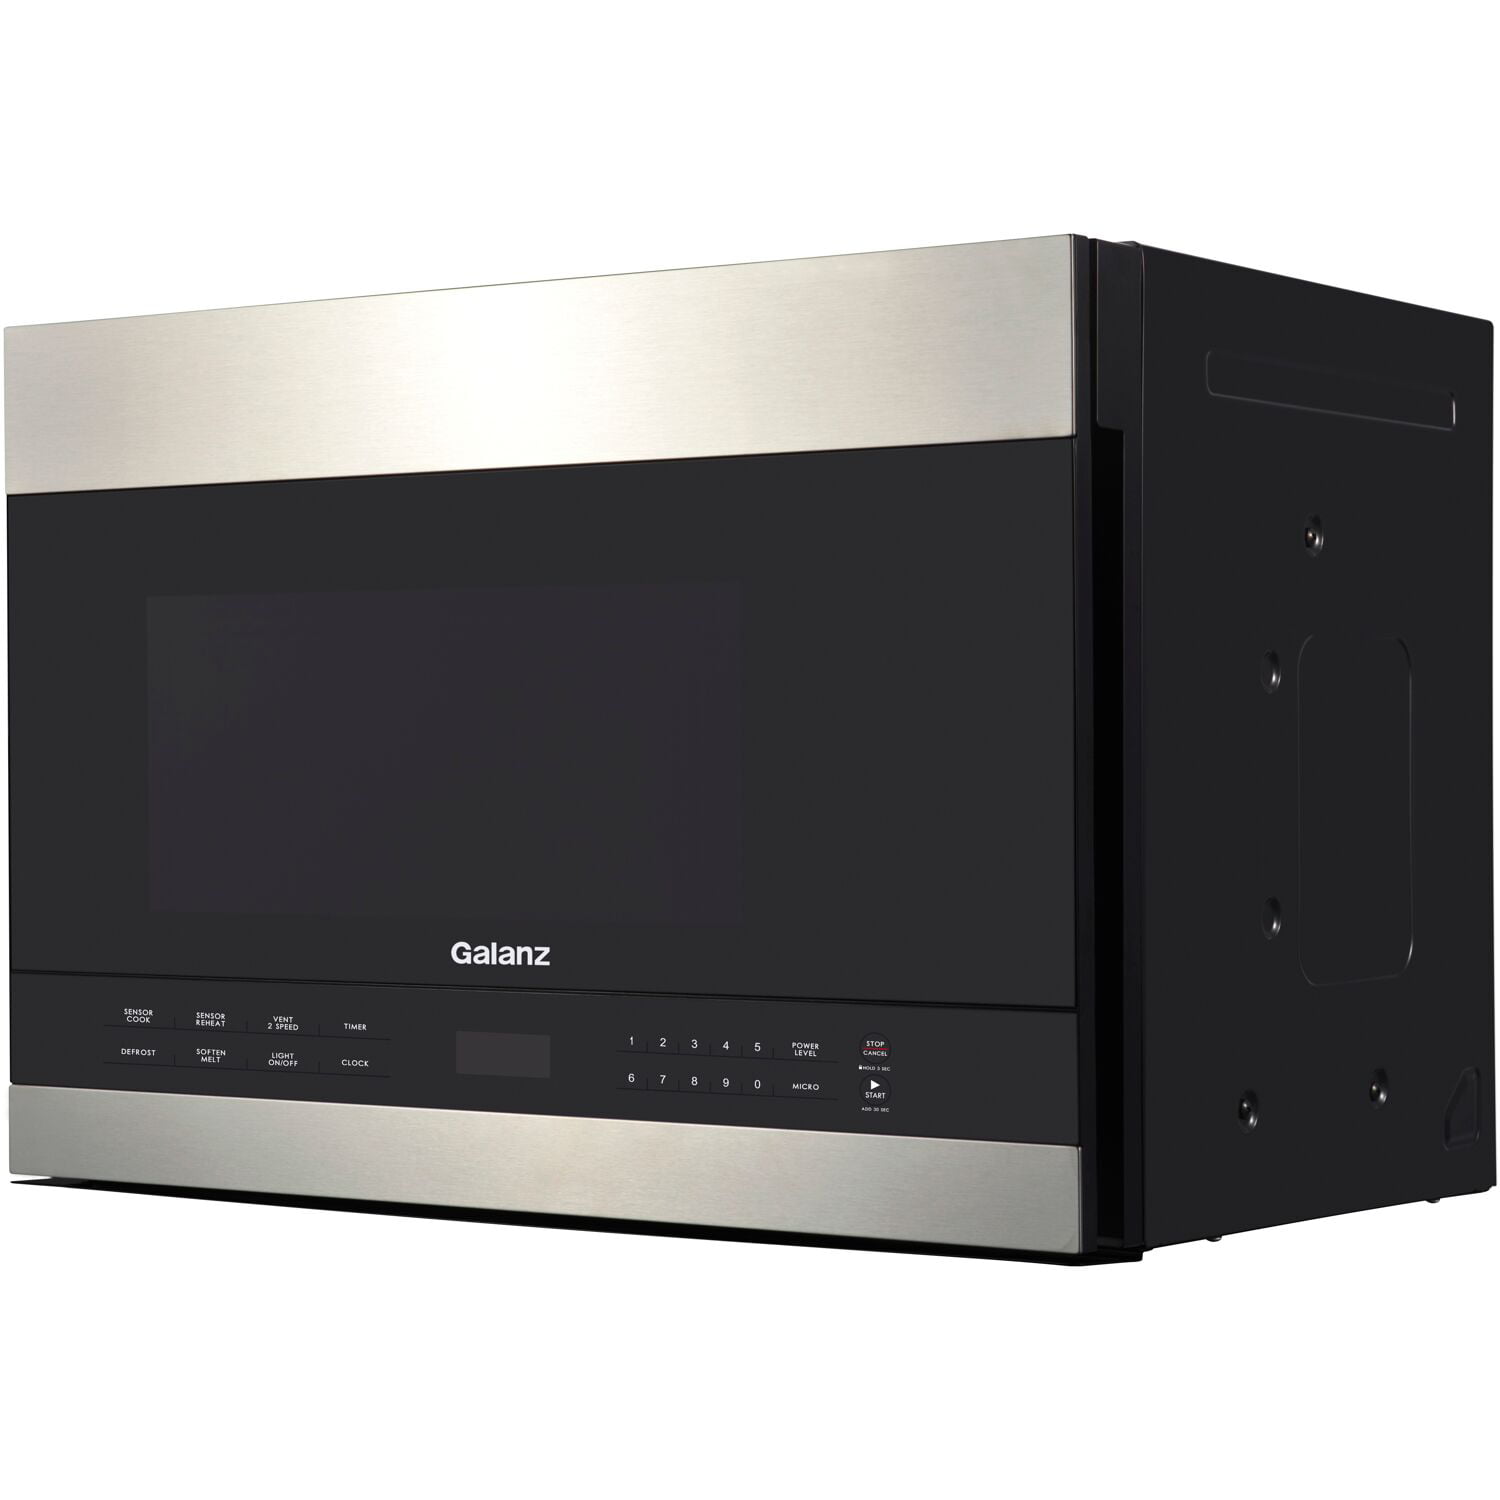 Haier Small Space Kitchen Appliances 1.4 Cubic Feet Over-The-Range  Microwave with Sensor Cooking